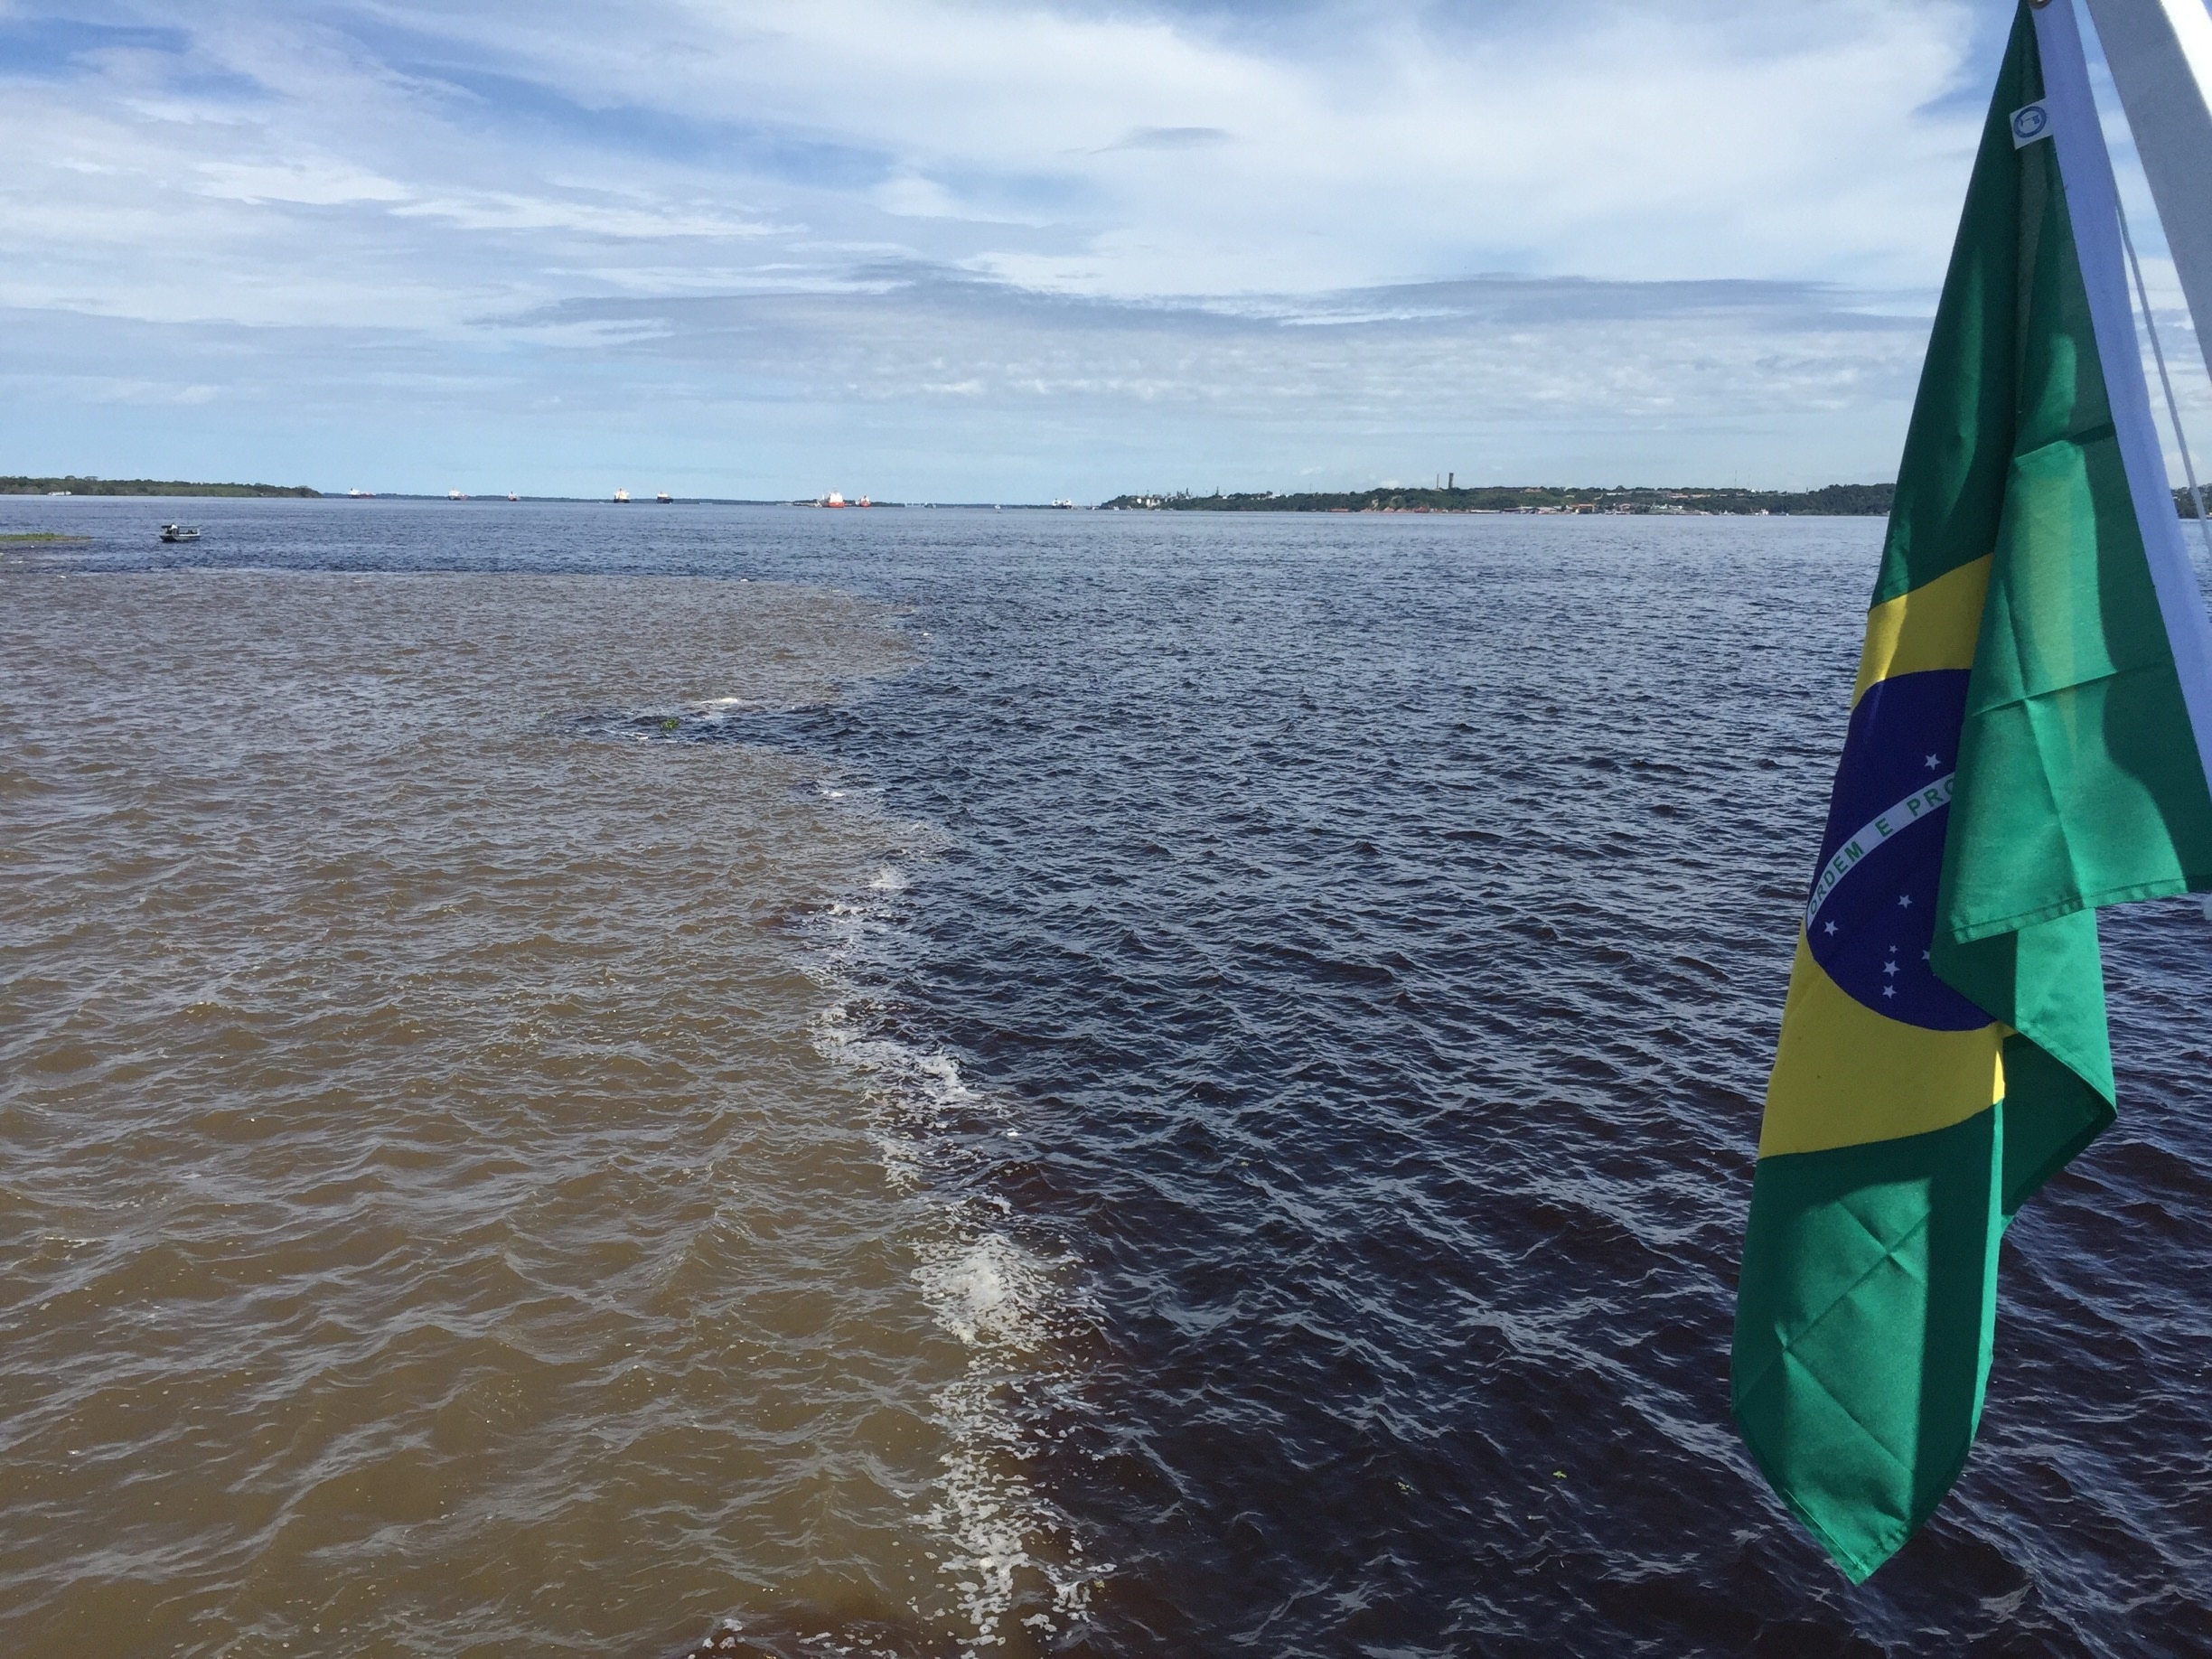 The Meeting of Waters (Portuguese: Encontro das Águas) is the confluence between the Rio Negro, a river with dark (almost black colored) water, and the sandy-colored Amazon River or Rio Solimões, as it is known the upper section of the Amazon in Brazil. For 6 km (3.7 mi) the river's waters run side by side without mixing. It is one of the main tourist attractions of Manaus, Brazil. 

This phenomenon is due to the differences in temperature, speed and water density of the two rivers. The Rio Negro flows at near 2 km per hour at a temperature of 28°C, while the Rio Solimões flows between 4 to 6 km per hour at a temperature of 22°C. [1]